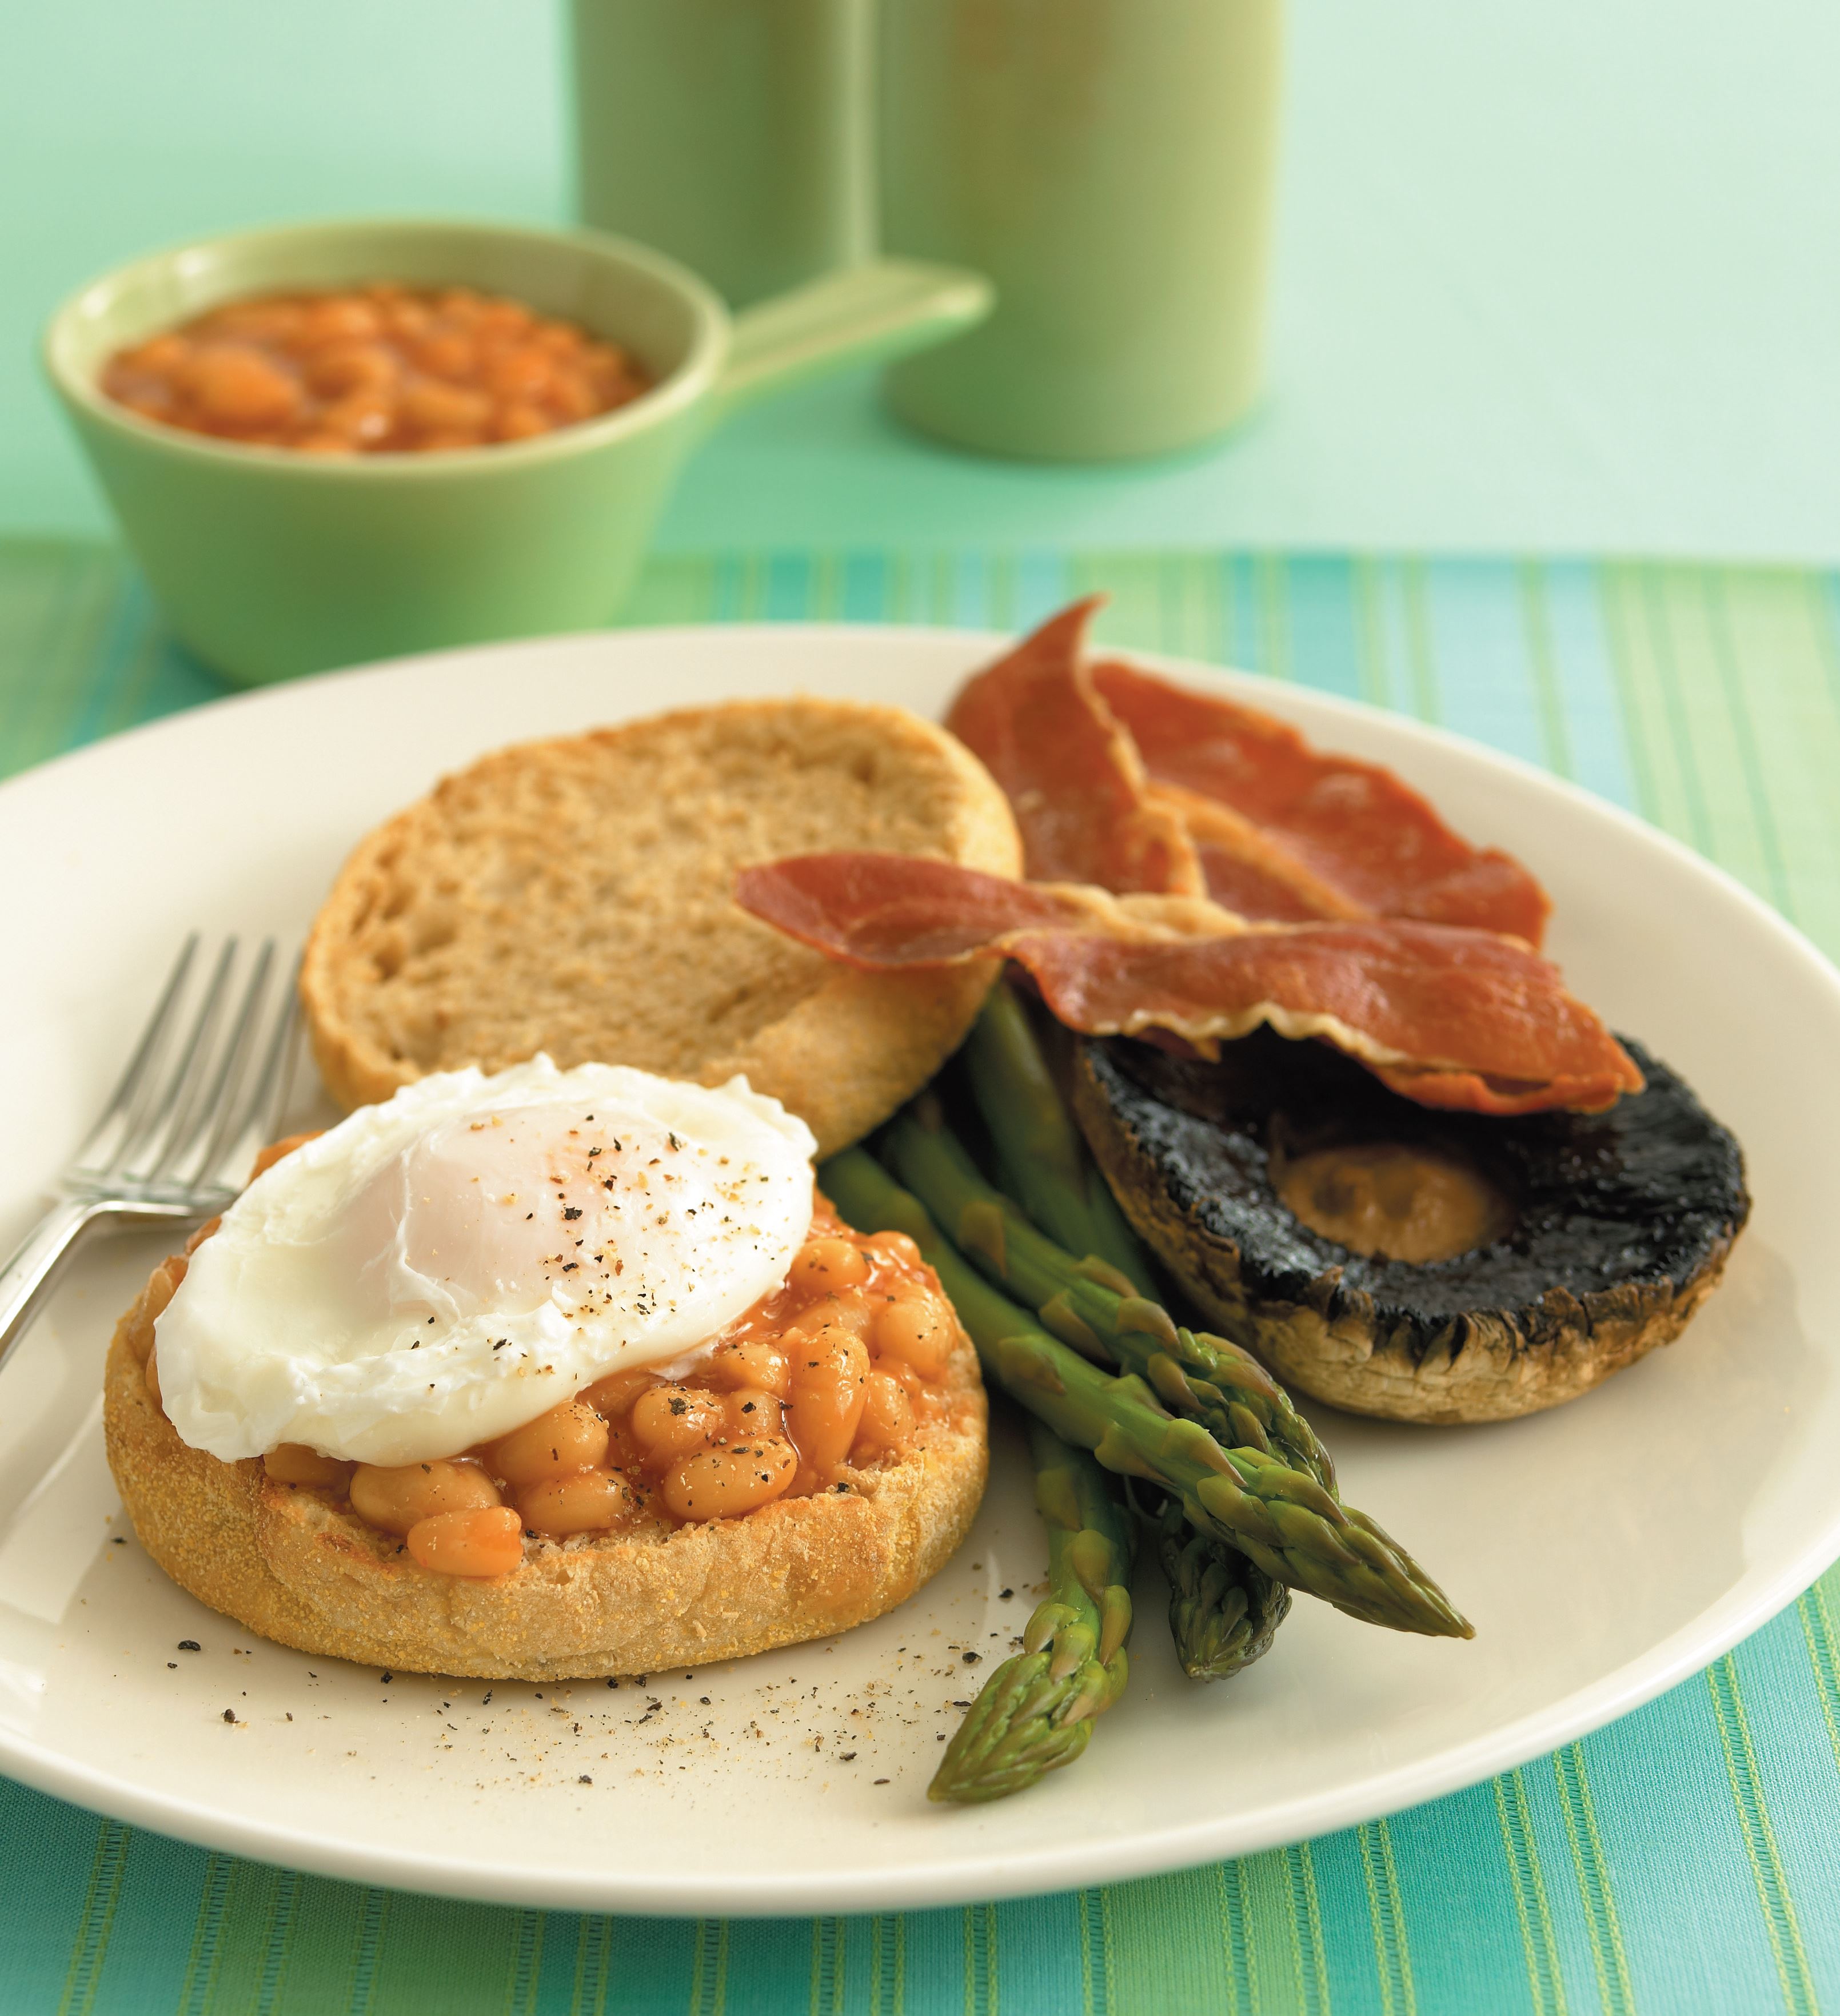 Big healthy breakfast with baked beans